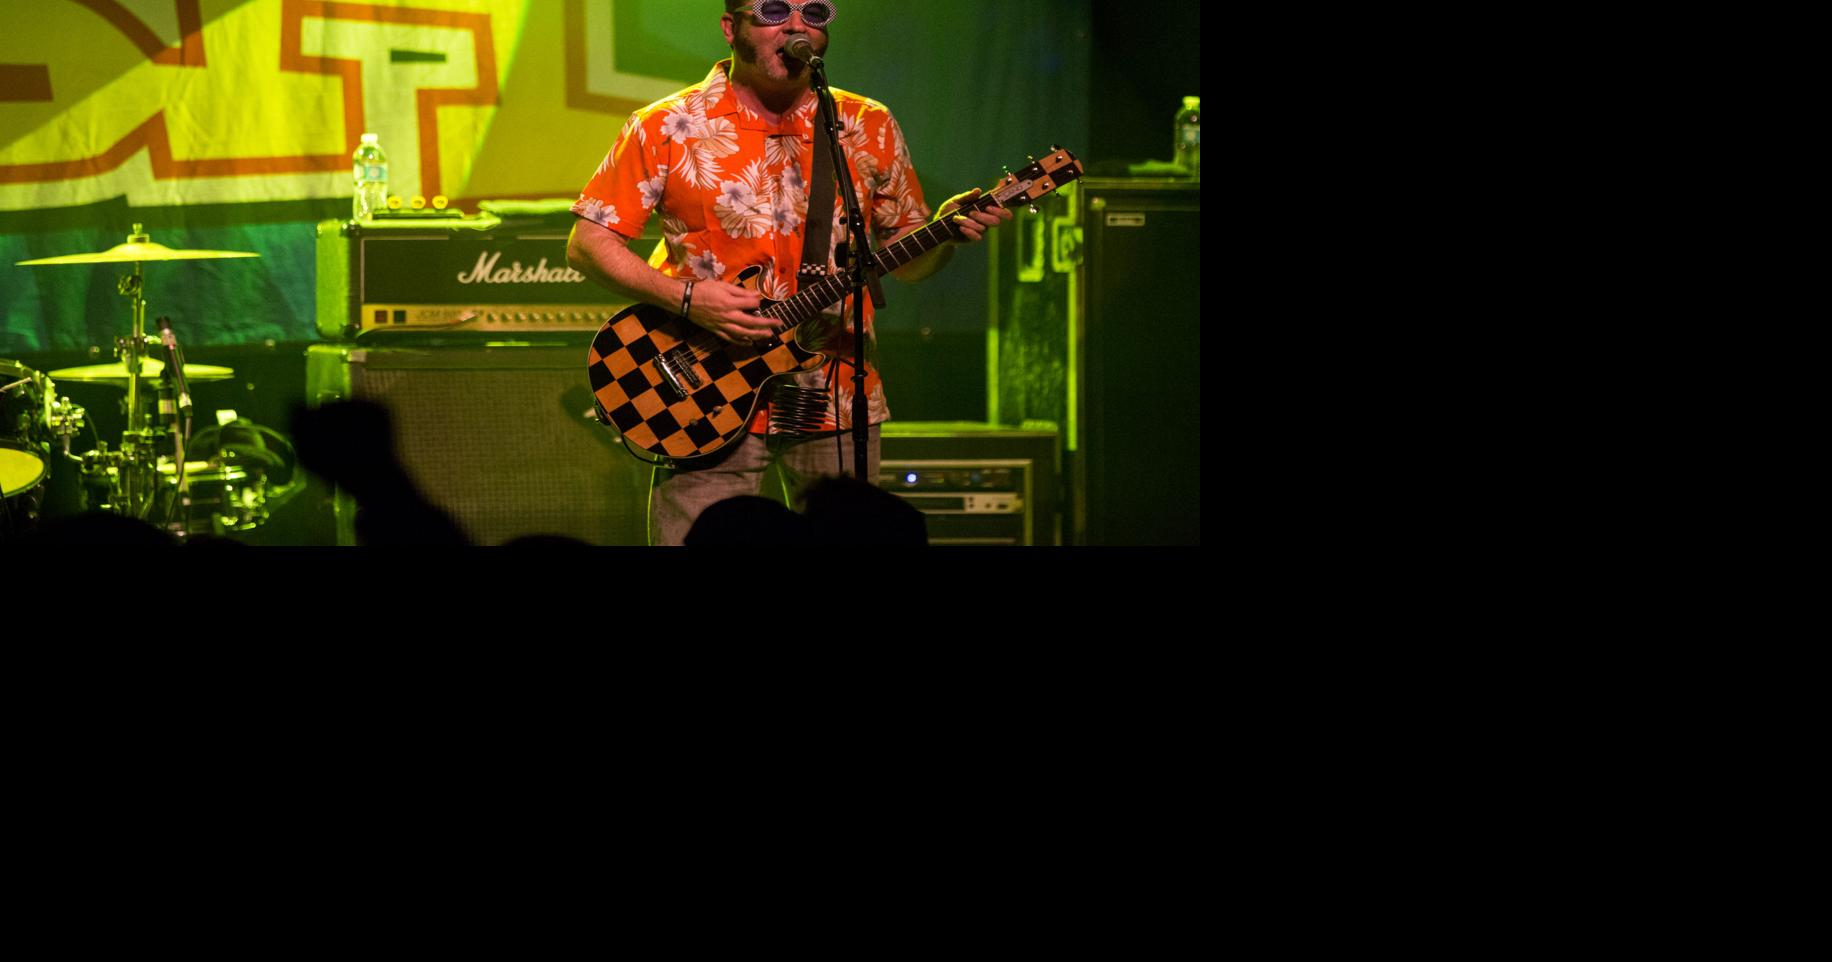 Reel Big Fish keep ska alive and audience hooked in Omaha show, Music